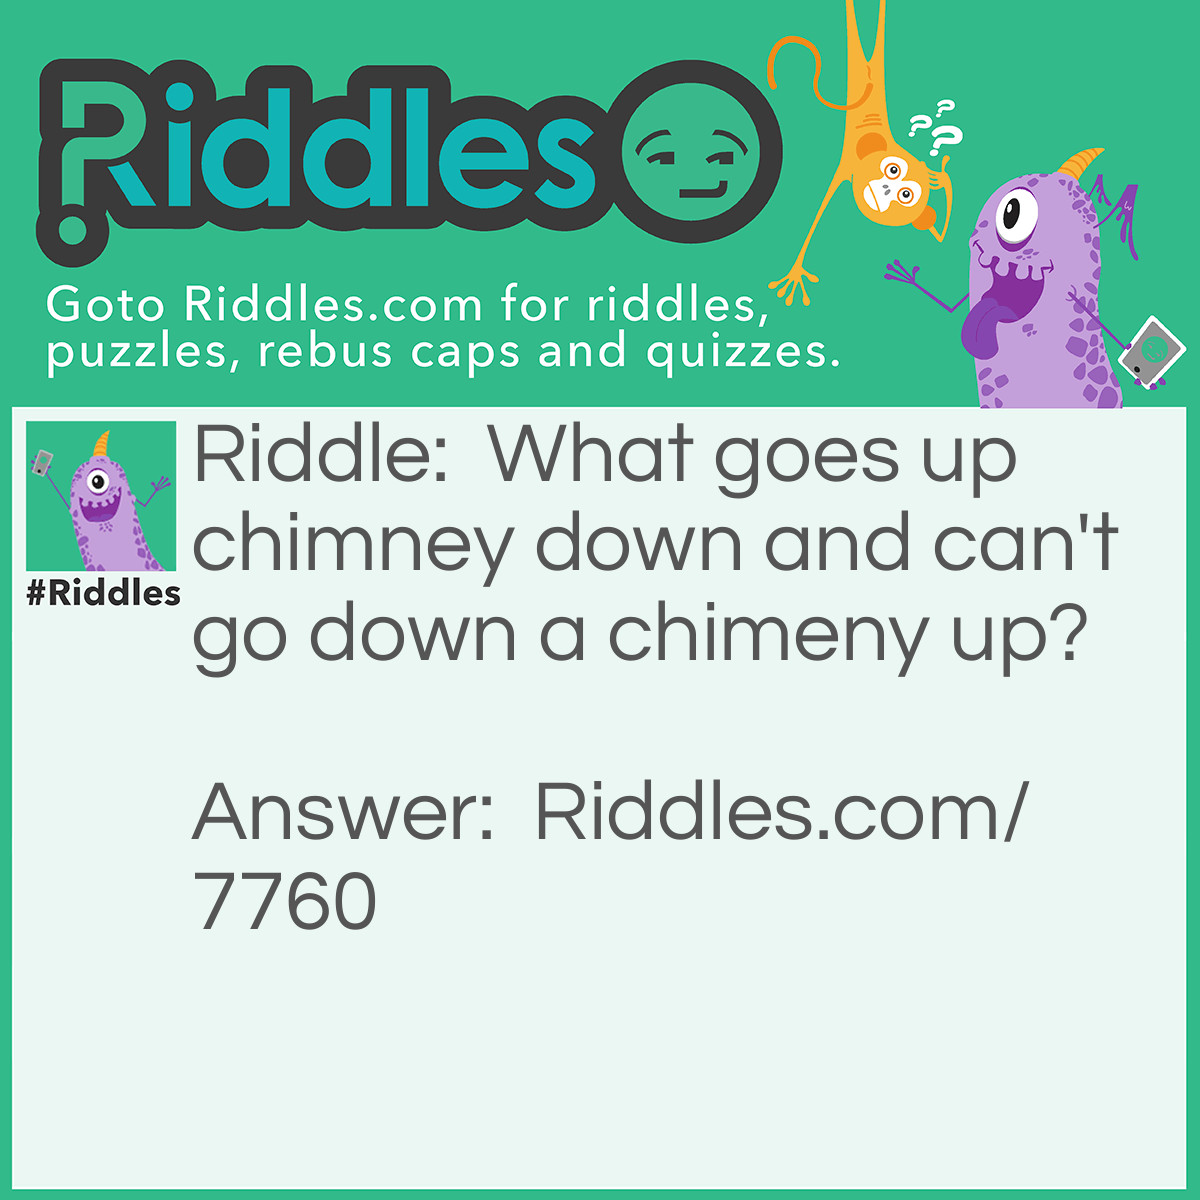 Riddle: What goes up chimney down and can't go down a chimeny up? Answer: An umbrella.